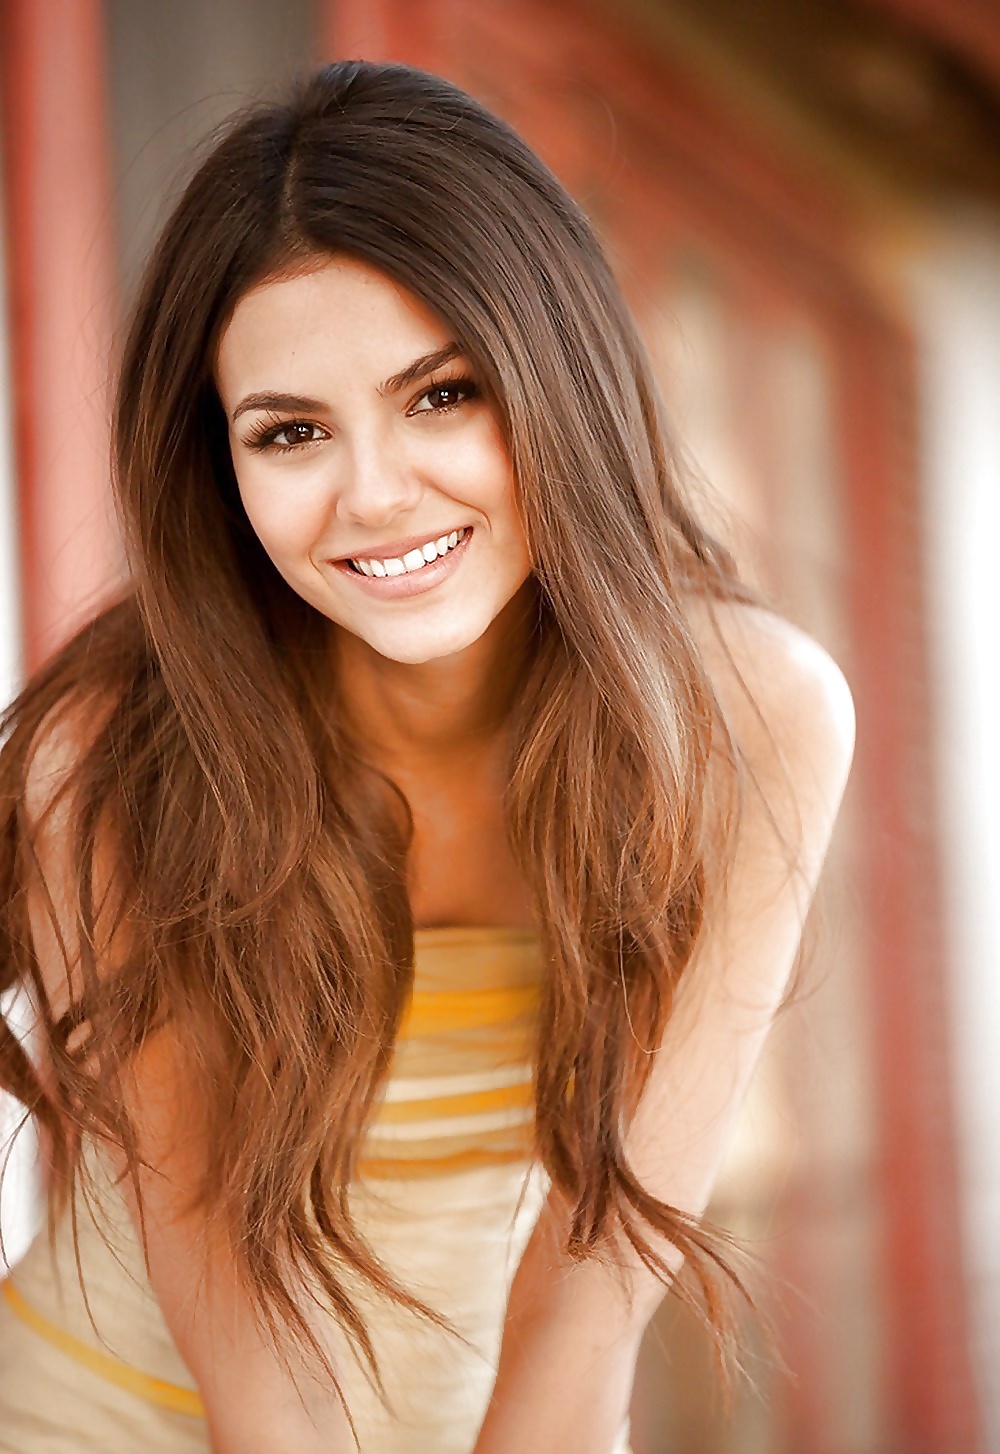 Victoria Justice - Tight-bodied Nickelodeon Angel #25717362